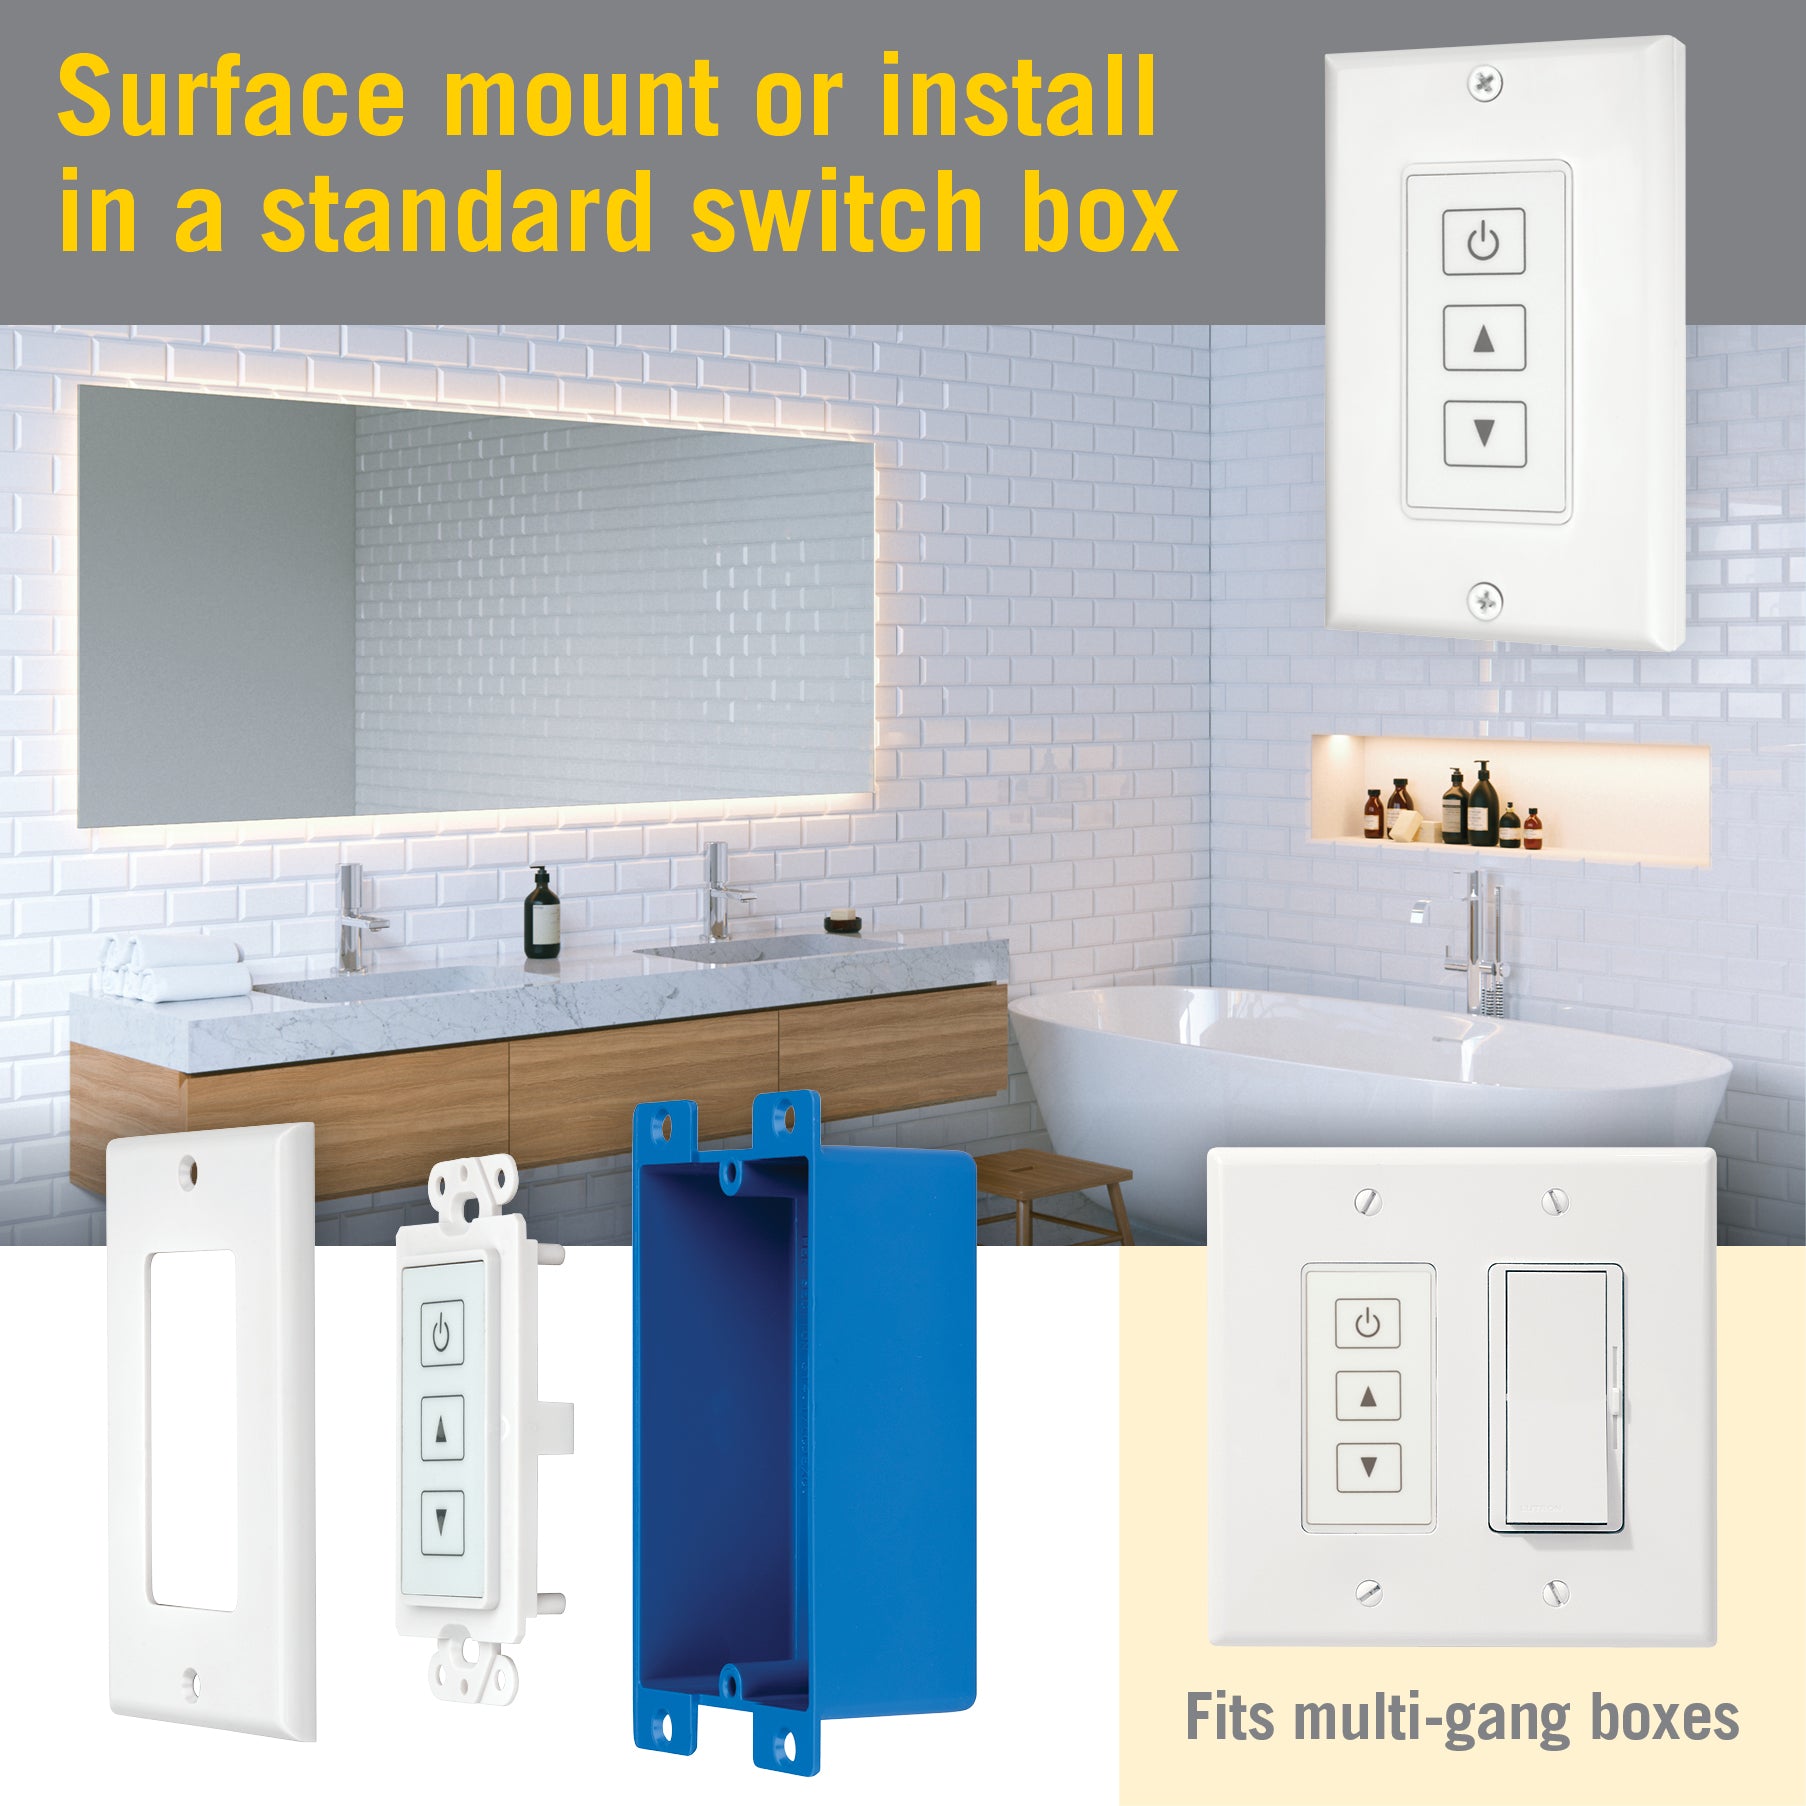 https://cdn.shopify.com/s/files/1/0562/6285/2644/products/Wall-Mount-Wireless-Touchpad-for-White_20Dimmers-523121-installation.jpg?v=1662123605&width=1946